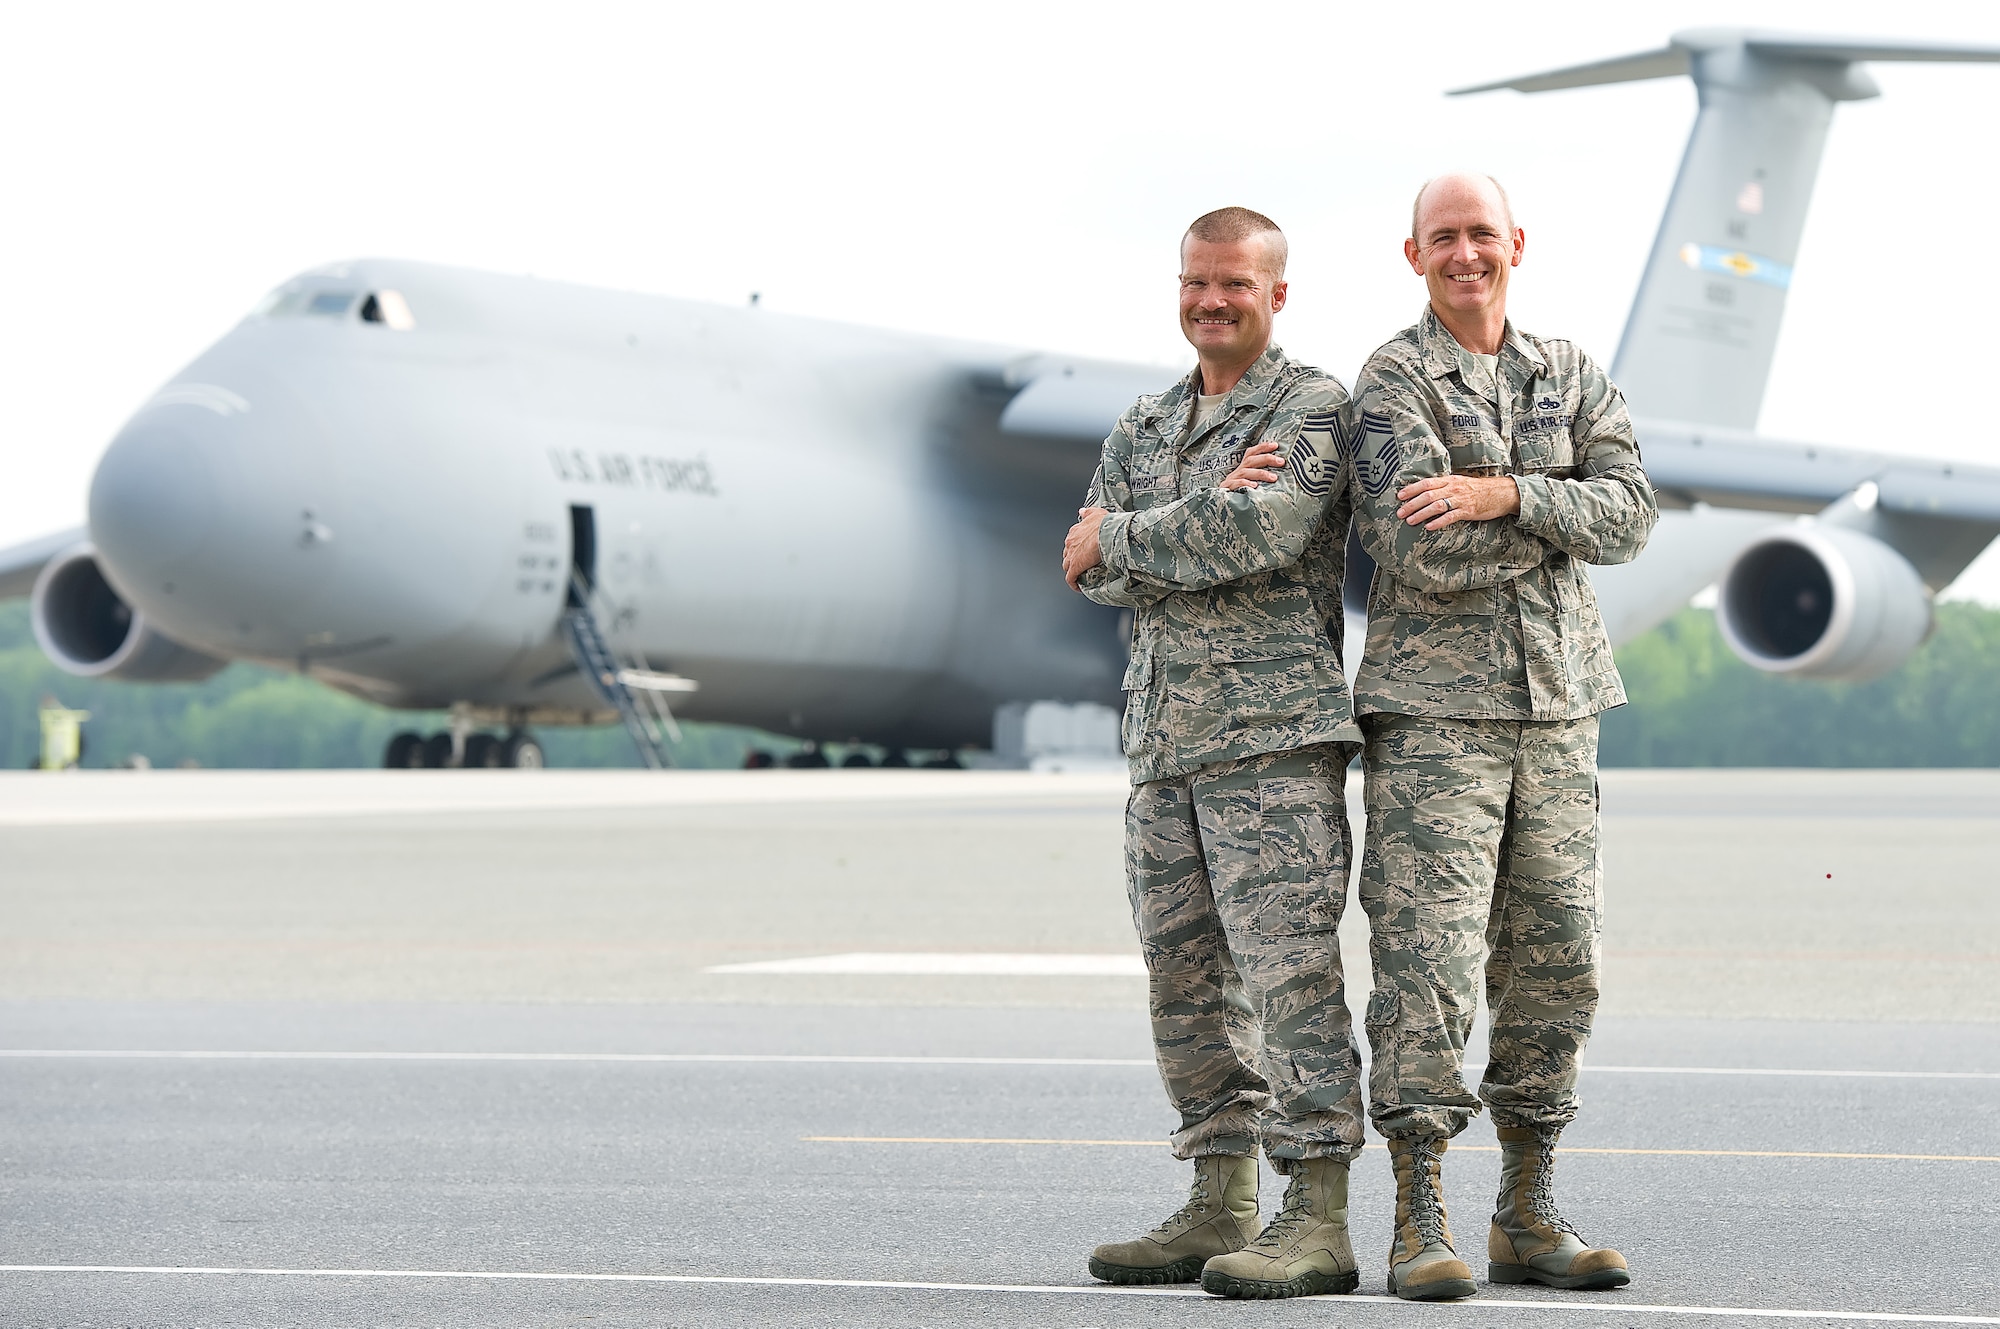 Chief Master Sgts. Robert Wright (left), 436th Maintenance Group, and Bryan Ford, 512th Maintenance Group, stand together July 3, 2013, on the flightline of Dover Air Force Base, Del., where they first began working with each other in 1994, after having known each other through their high school years in Virginia during the mid-1980s. Wright and Ford, an active-duty and reserve Airman, teamed together and led numerous Total Force Initiatives for the Air Force and Air Force Reserve. Since the photo was taken, Wright has retired but still serves on base as a contractor. (U.S. Air Force photo by Roland Balik)